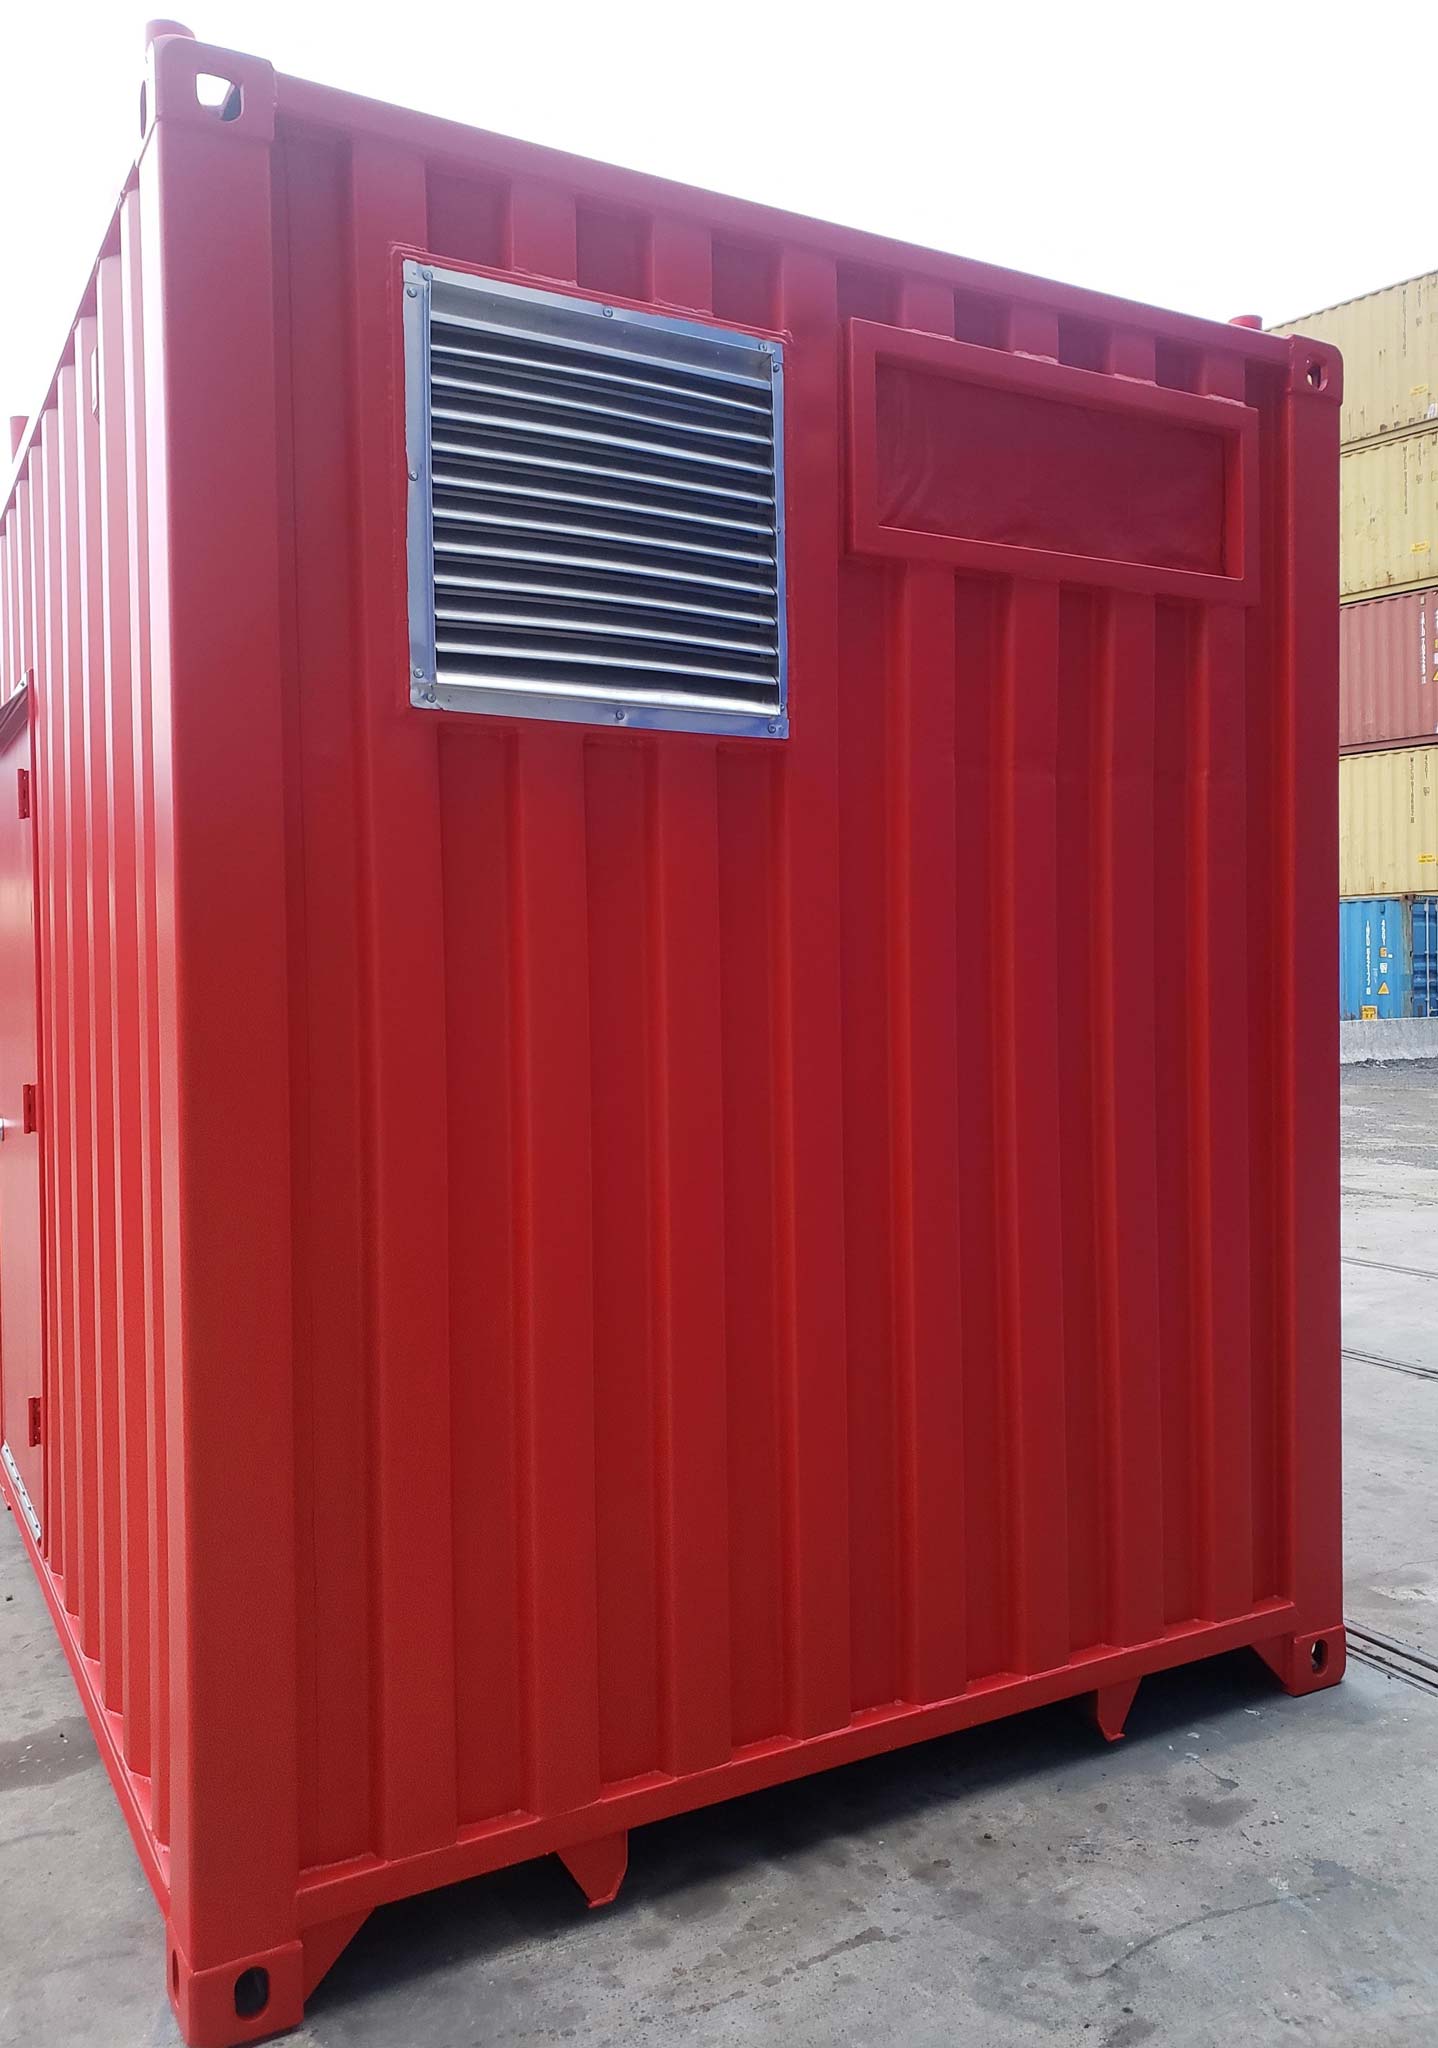 Hvac For Shipping Containers Ventilation And Heating Interport